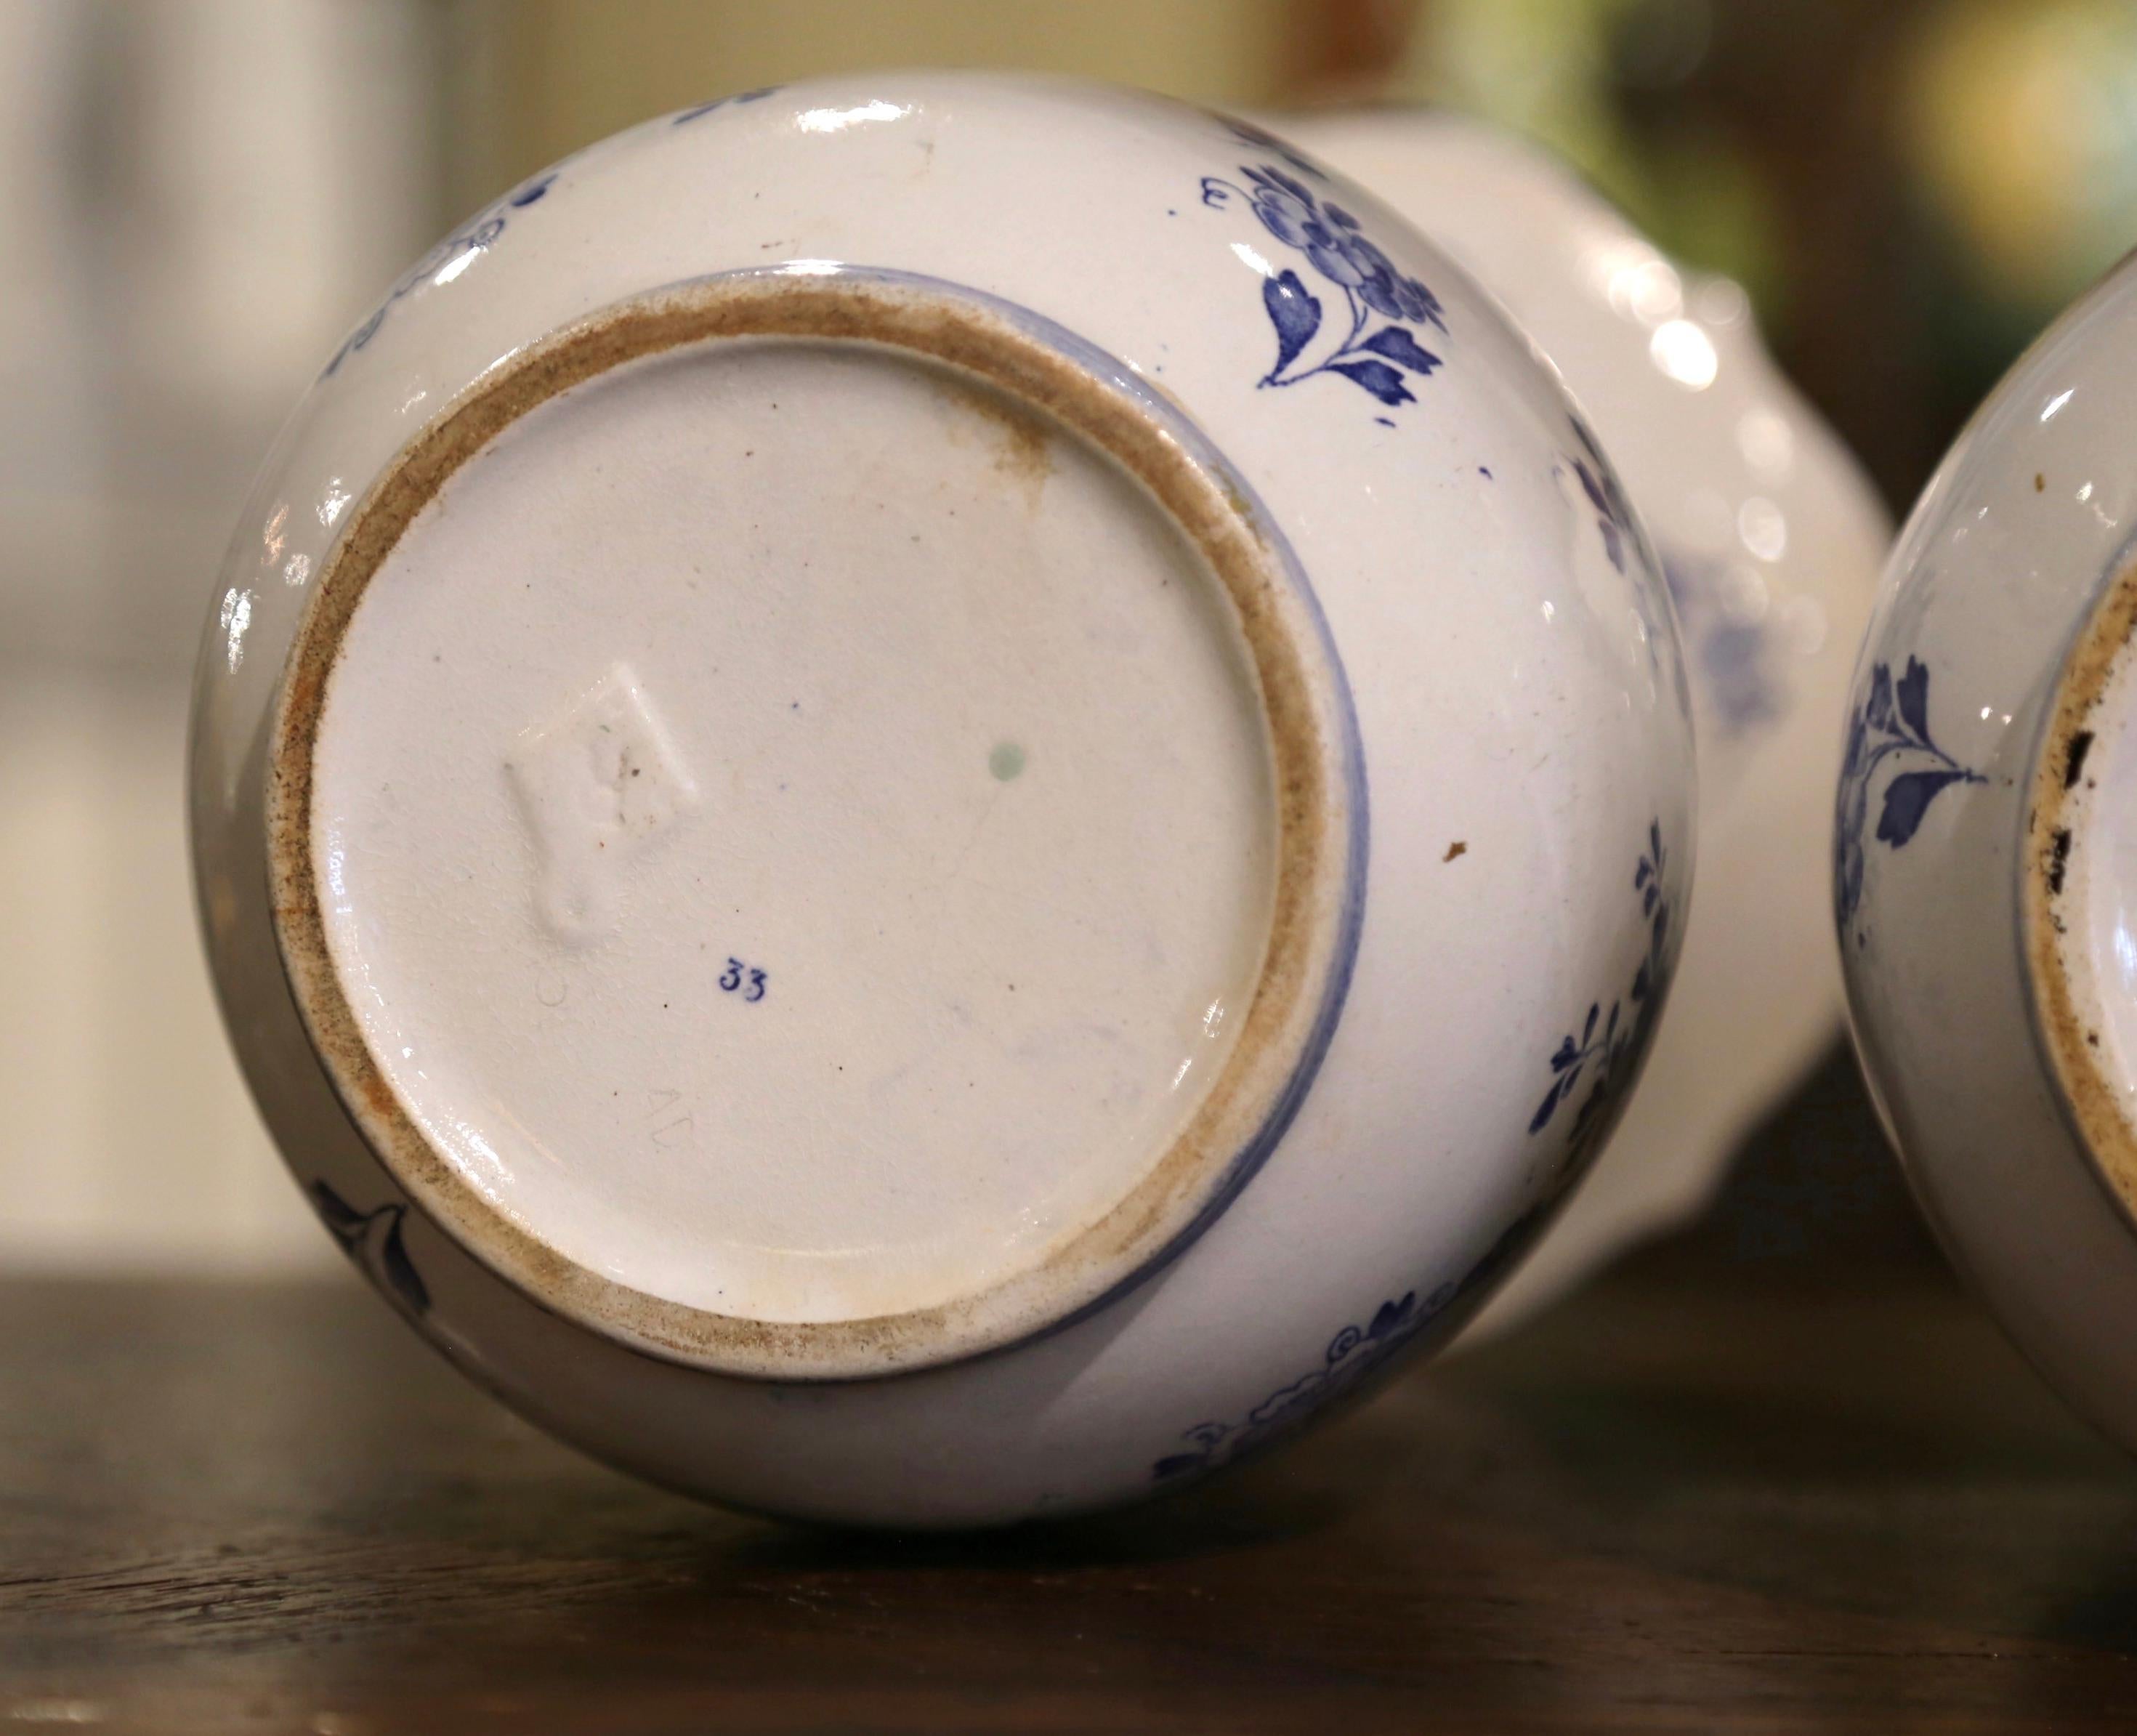 Pair of Early 20th Century Dutch Blue and White Hand Painted Faience Delft Vases For Sale 4